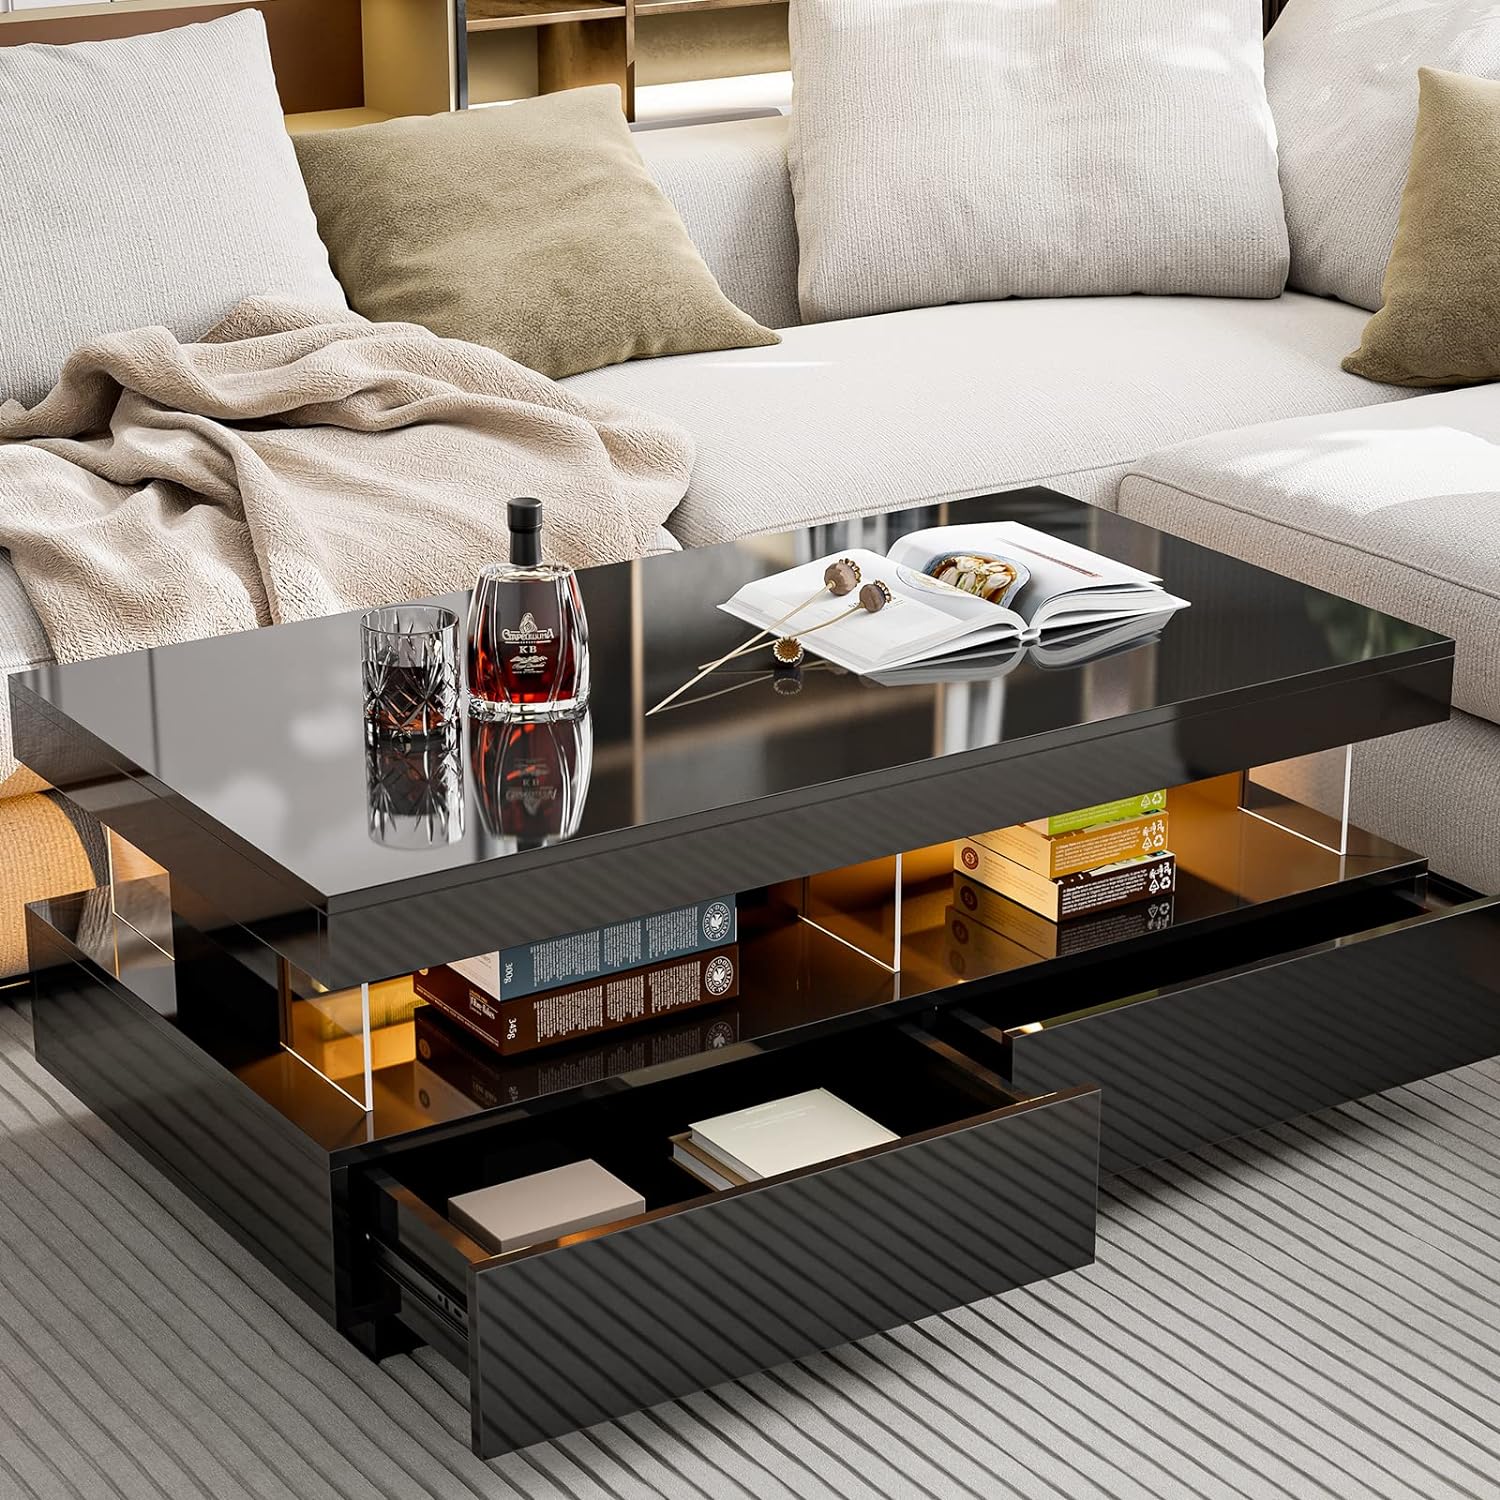 IKIFLY Modern LED Coffee Table, Black High Glossy Coffee Table with Acrylic Design Open Space and 2 Storage Drawers, Rectangle Coffee Table with 16 Colors LED Lights for Living Room Bedroom